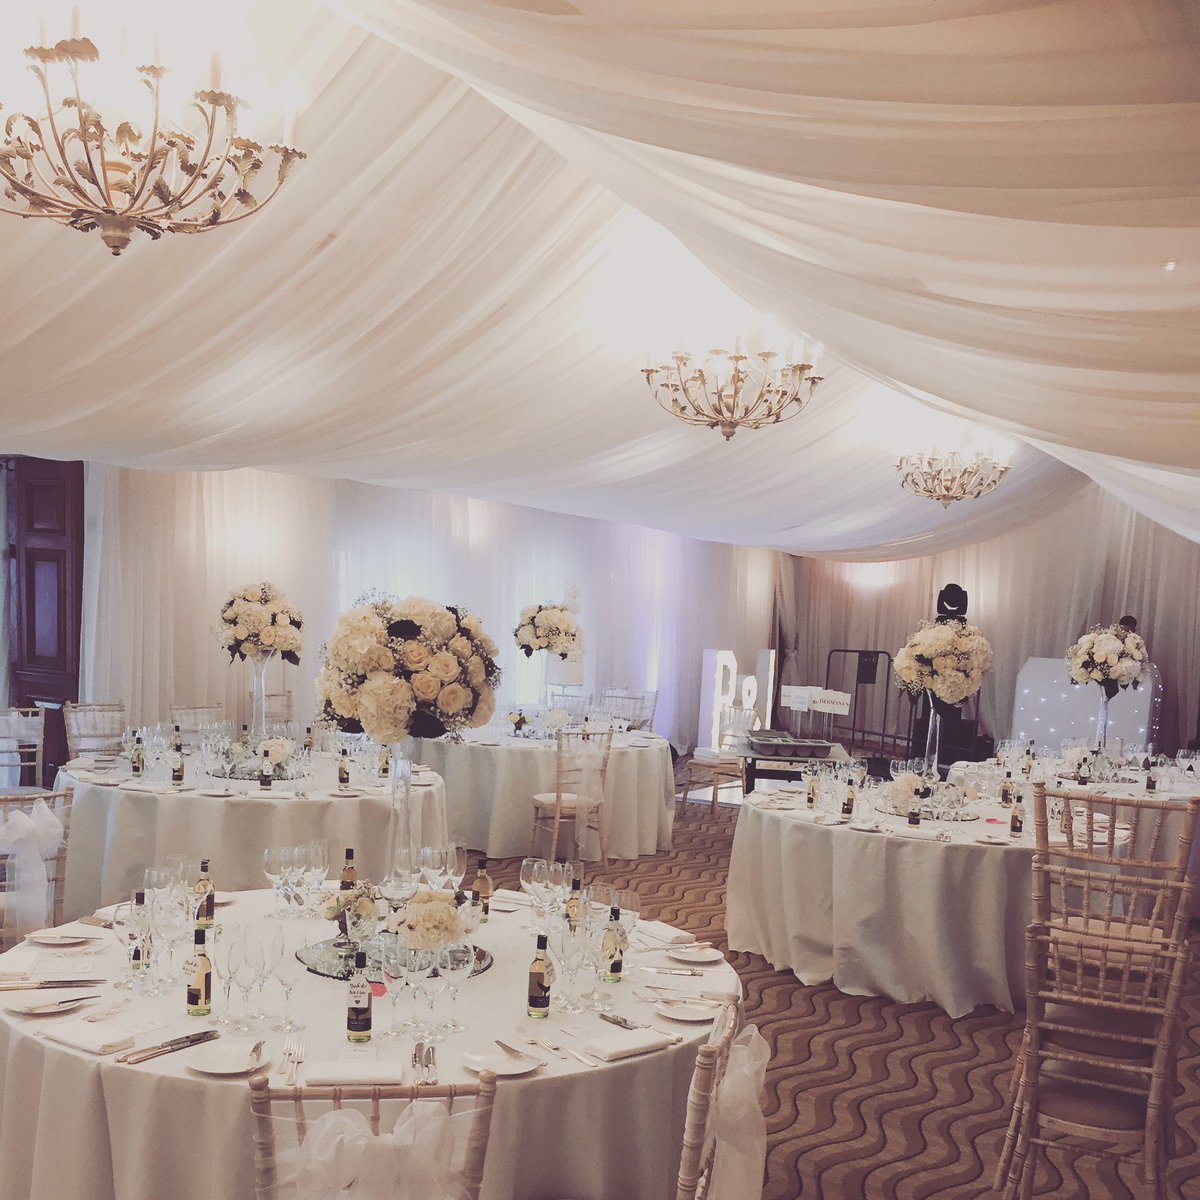 Ceiling drapes and wall drapes. The full venue draped combo.
Let us know how you would like us to drape your venue.

🤍Sophisticated Styling.🤍

Email michelle@rentevent.co.uk 

#weddingdrapes #weddingtrends2024 #weddingideas #brides #bridetobe #backdrops #cotswoldweddings